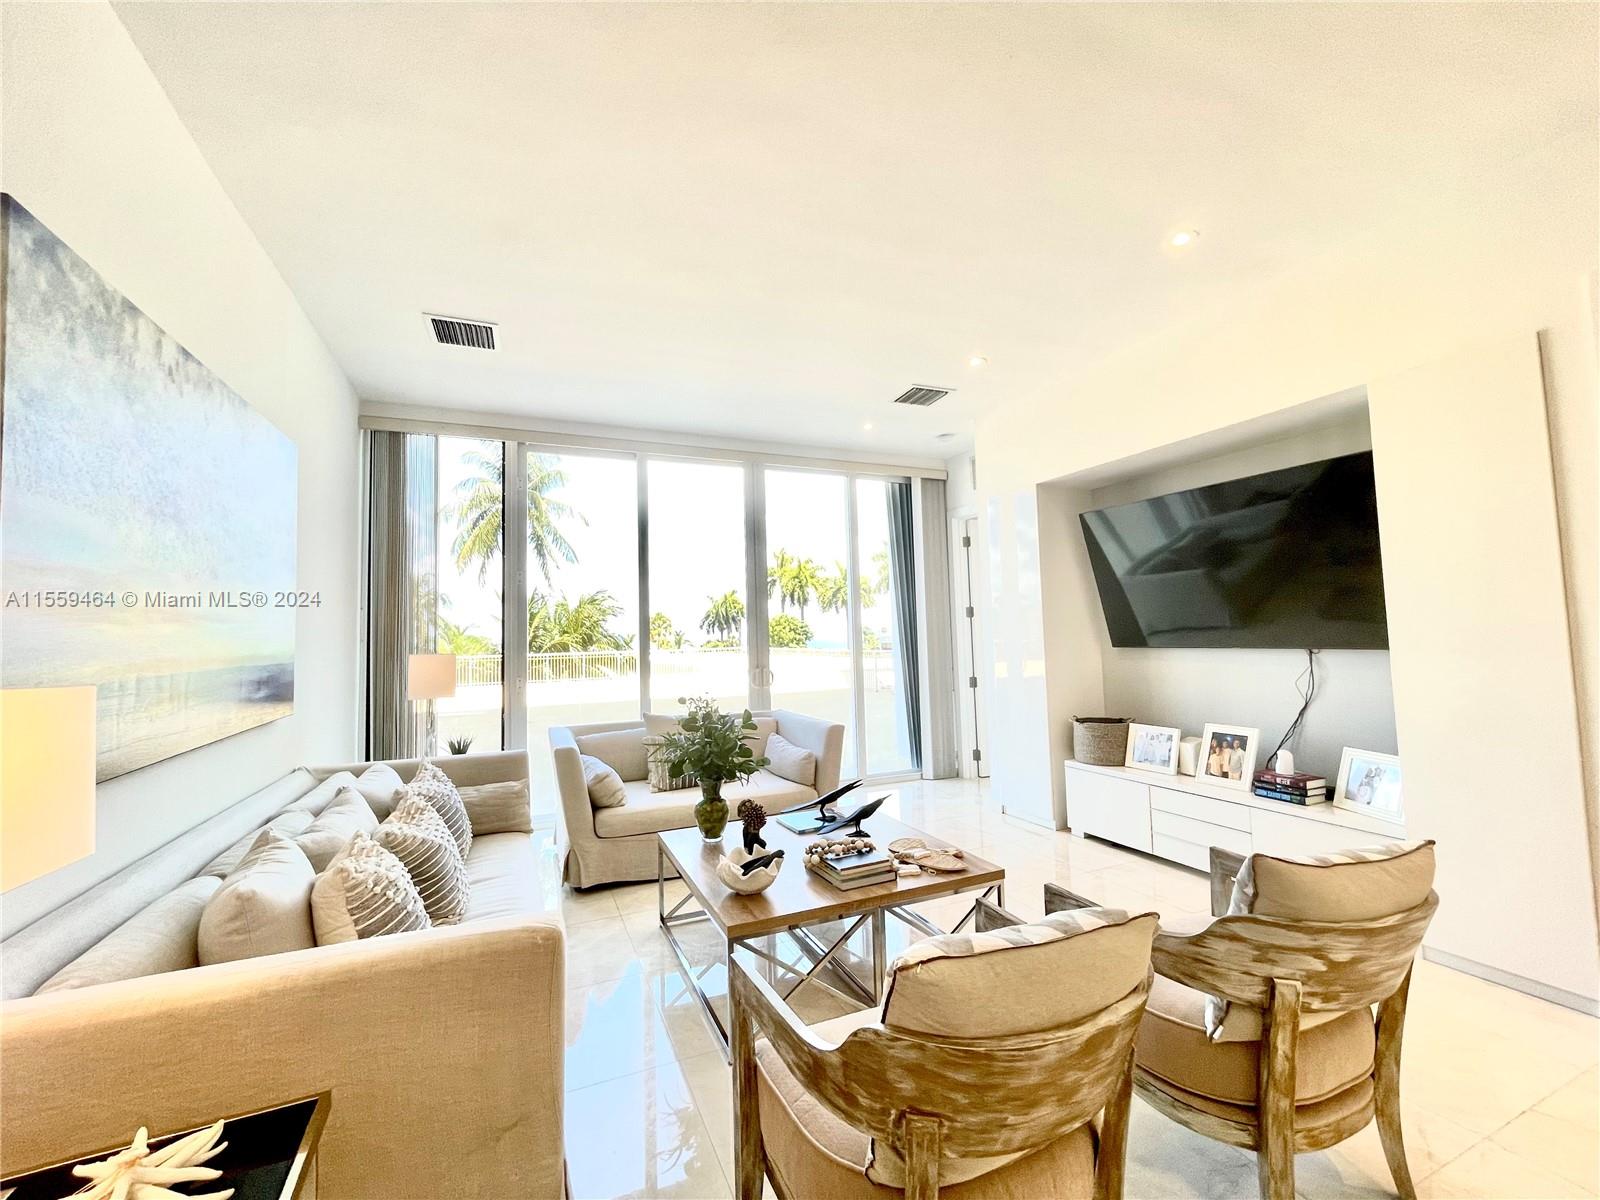 Rarely on the market, 1 bedroom 2 full baths. Steps from the Beach and Pool. Completely remodeled. Do not miss this opportunity to own on the prestigious Island of Key Biscayne. Easy to show.